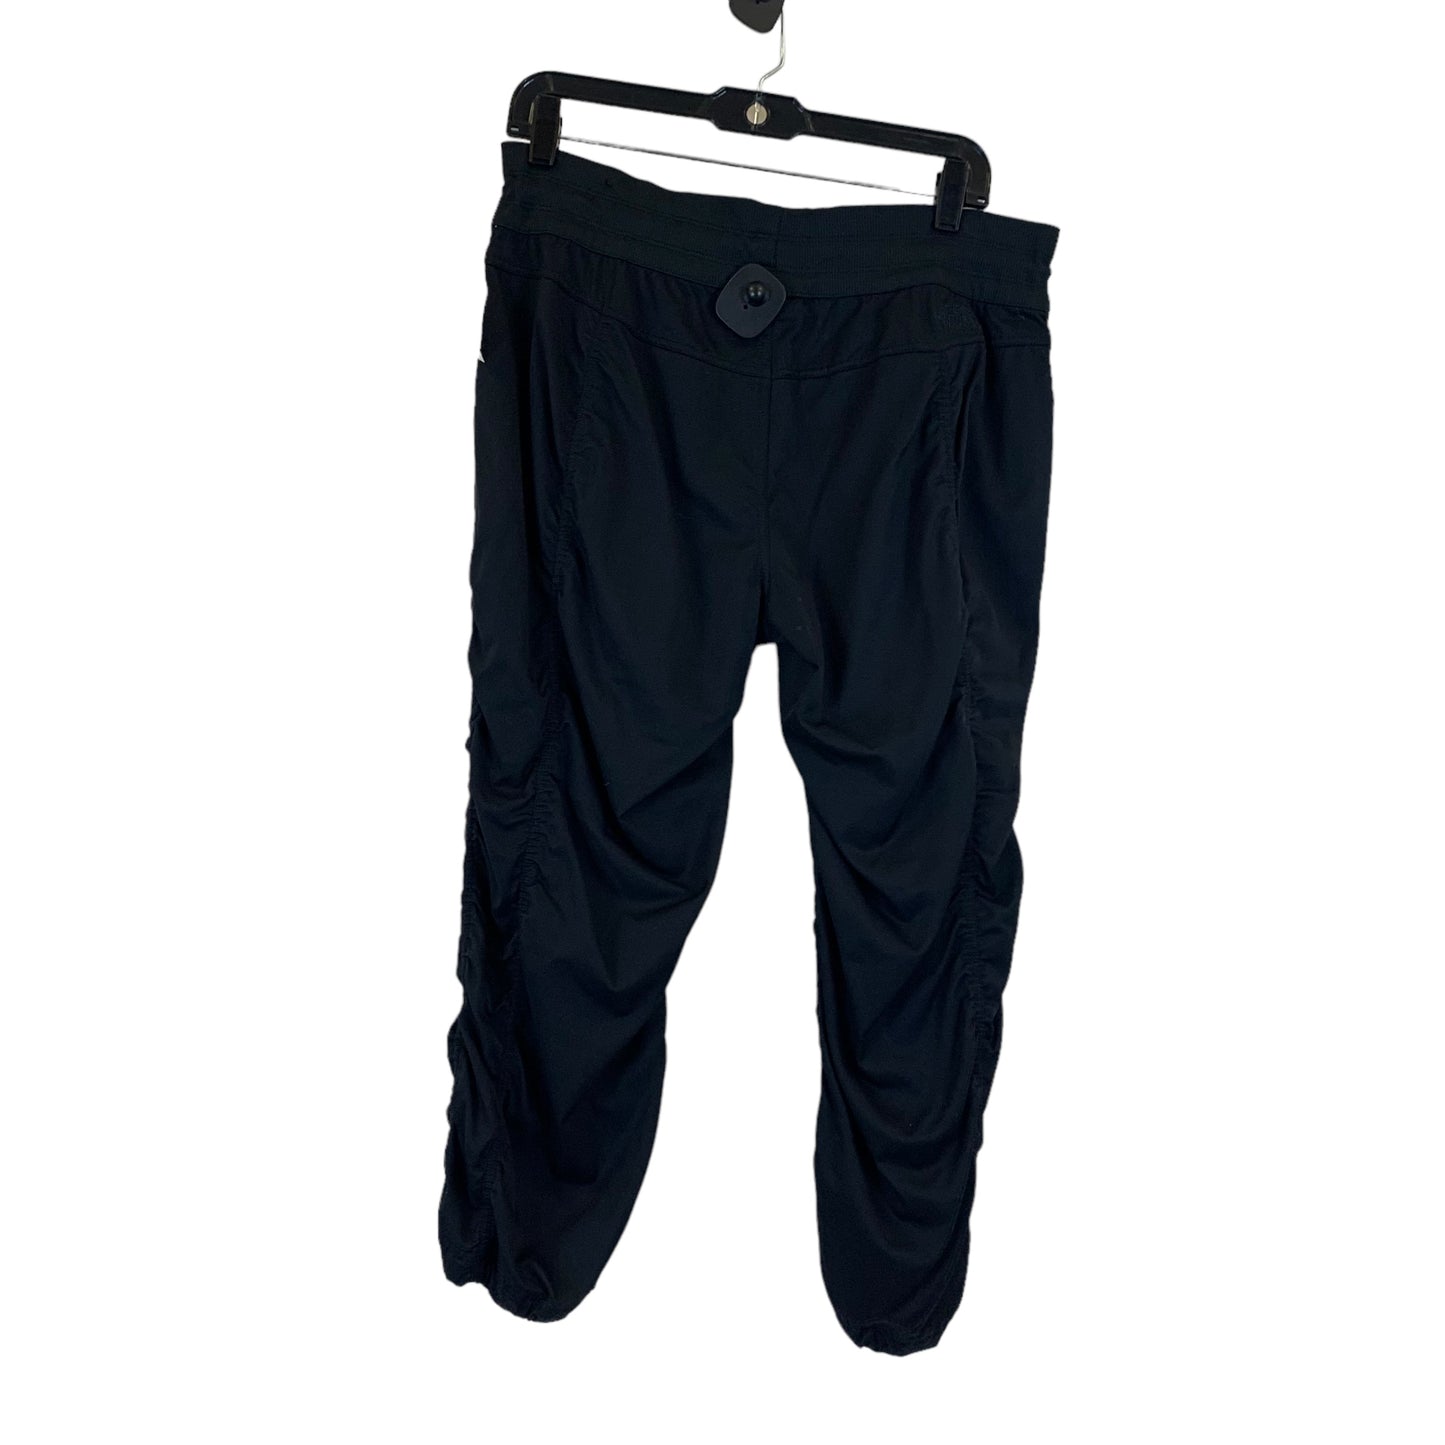 Athletic Leggings By The North Face  Size: L